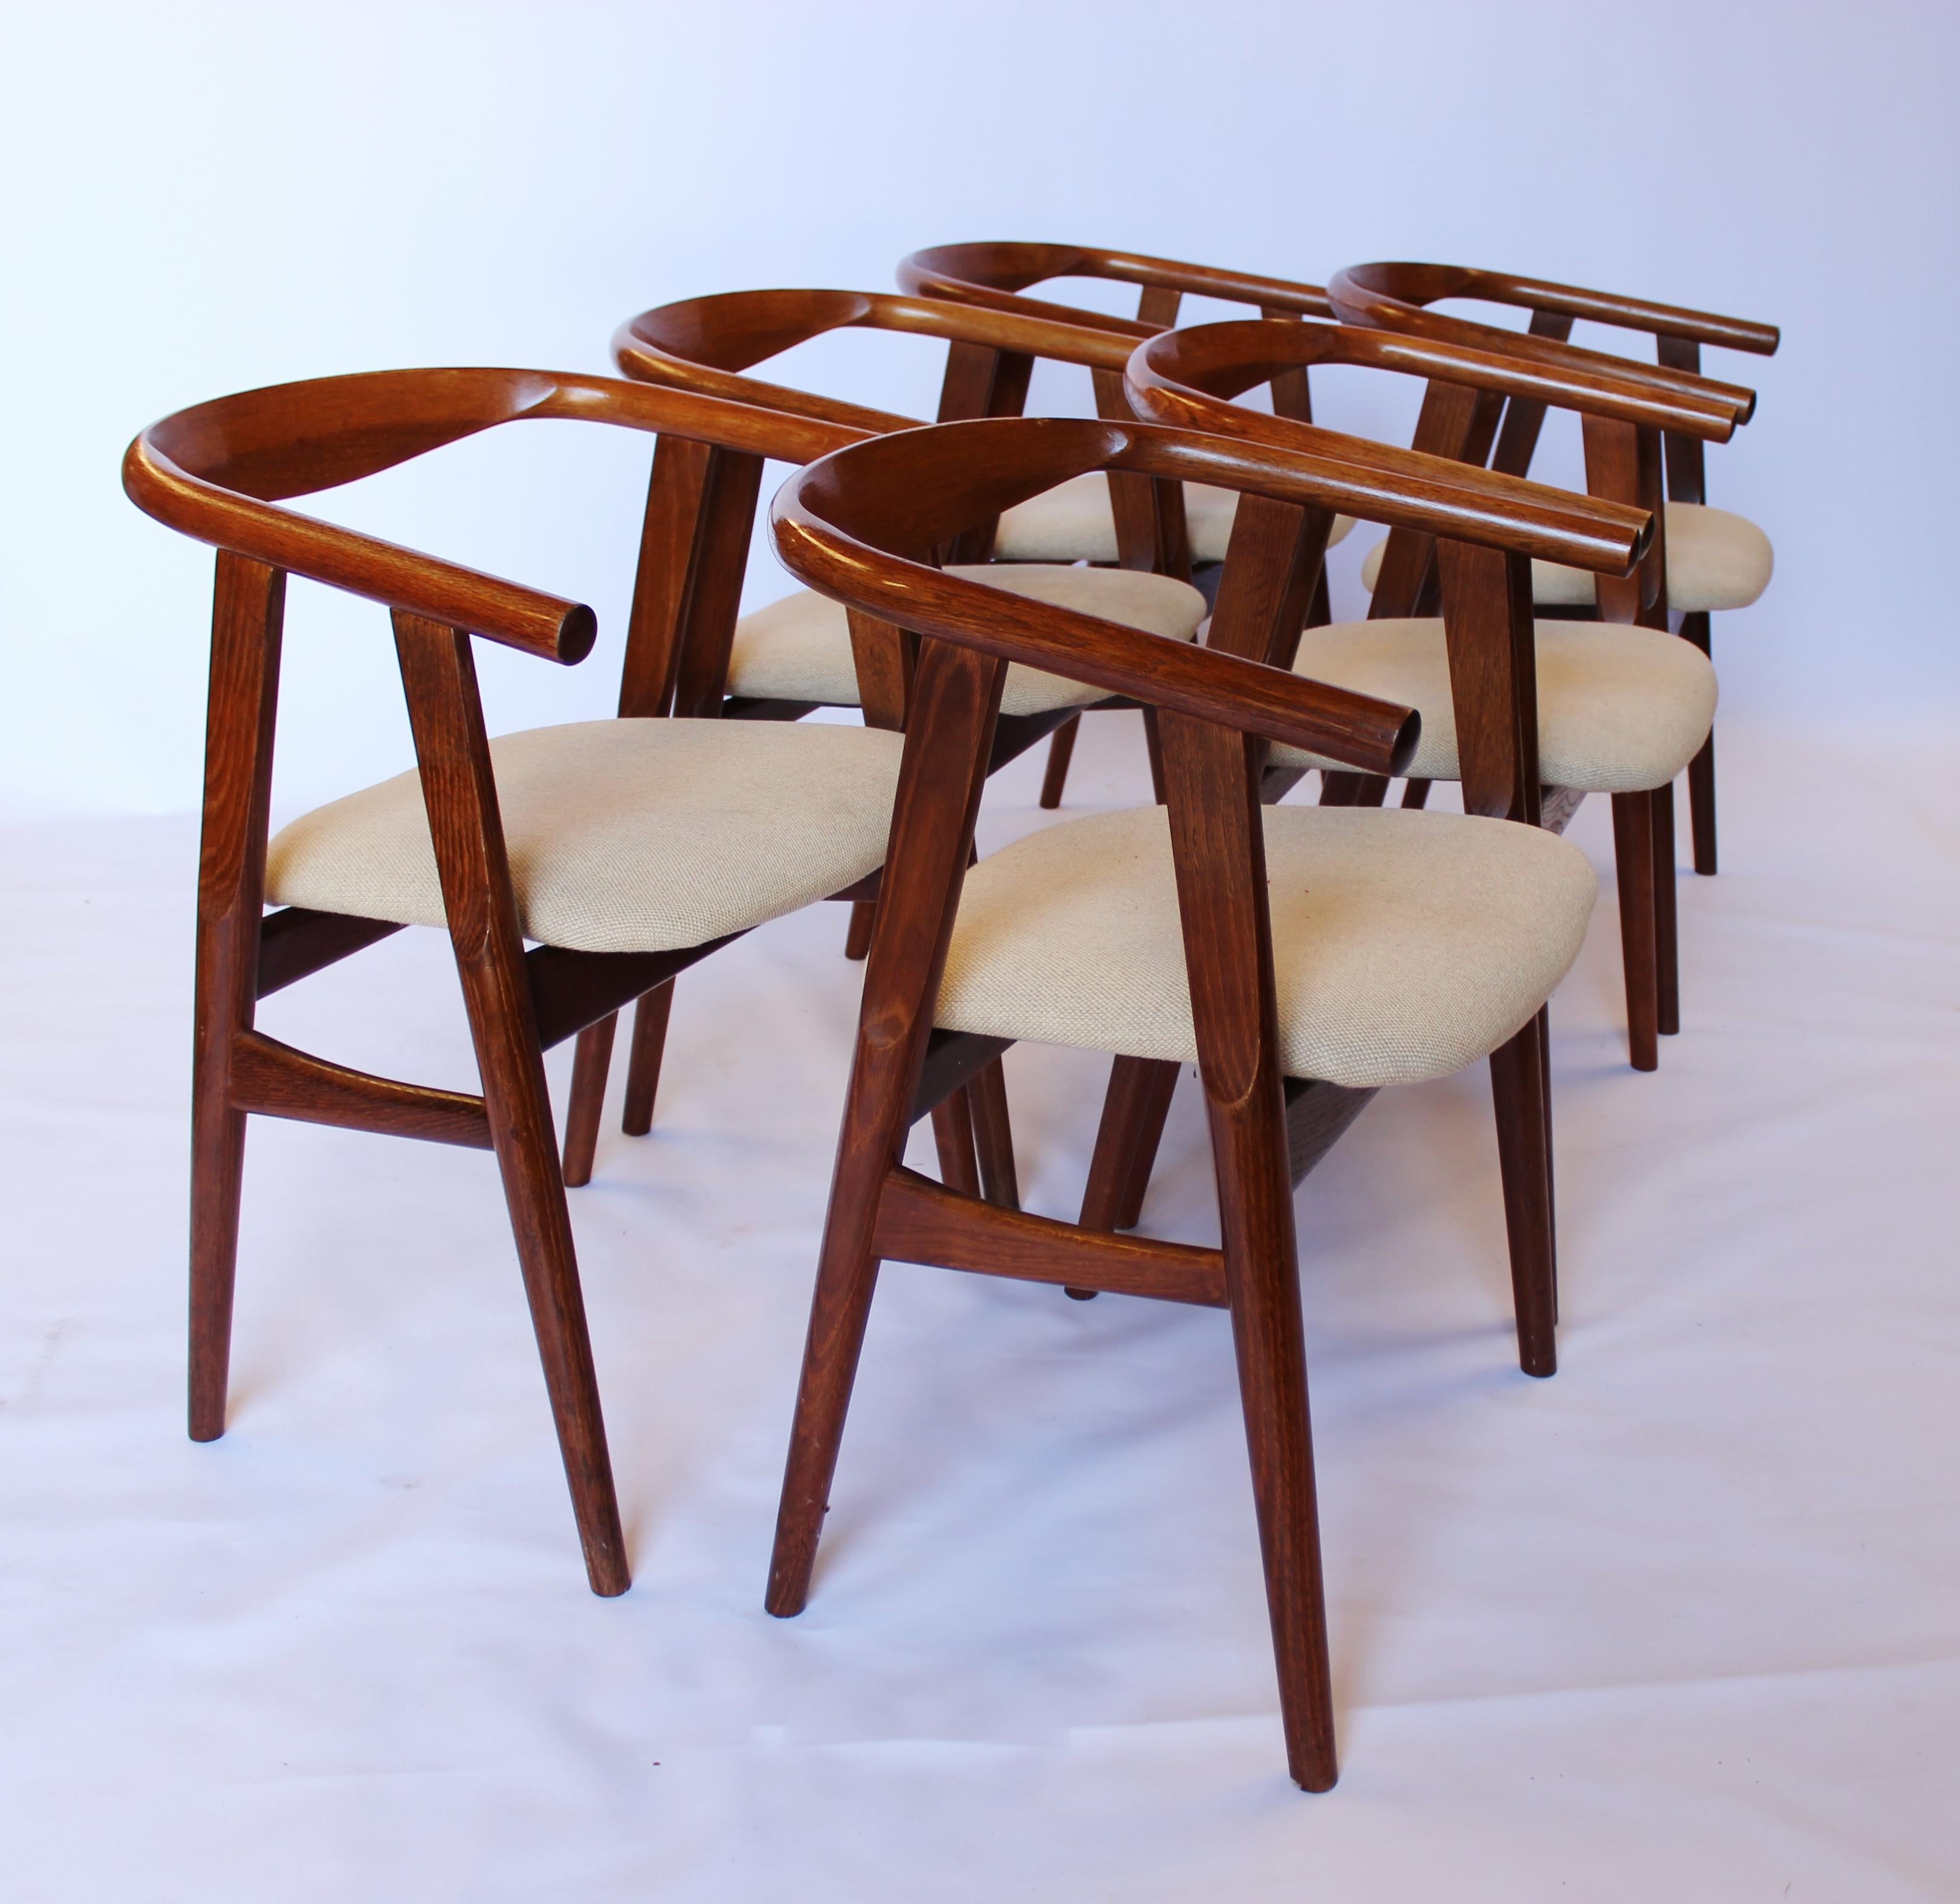 Set of six dining room chairs, model GE525, designed by Hans J. Wegner and manufactured by GETAMA in the 1960s. The chairs are of oak and upholstered in light fabric. The chairs are in great vintage condition.